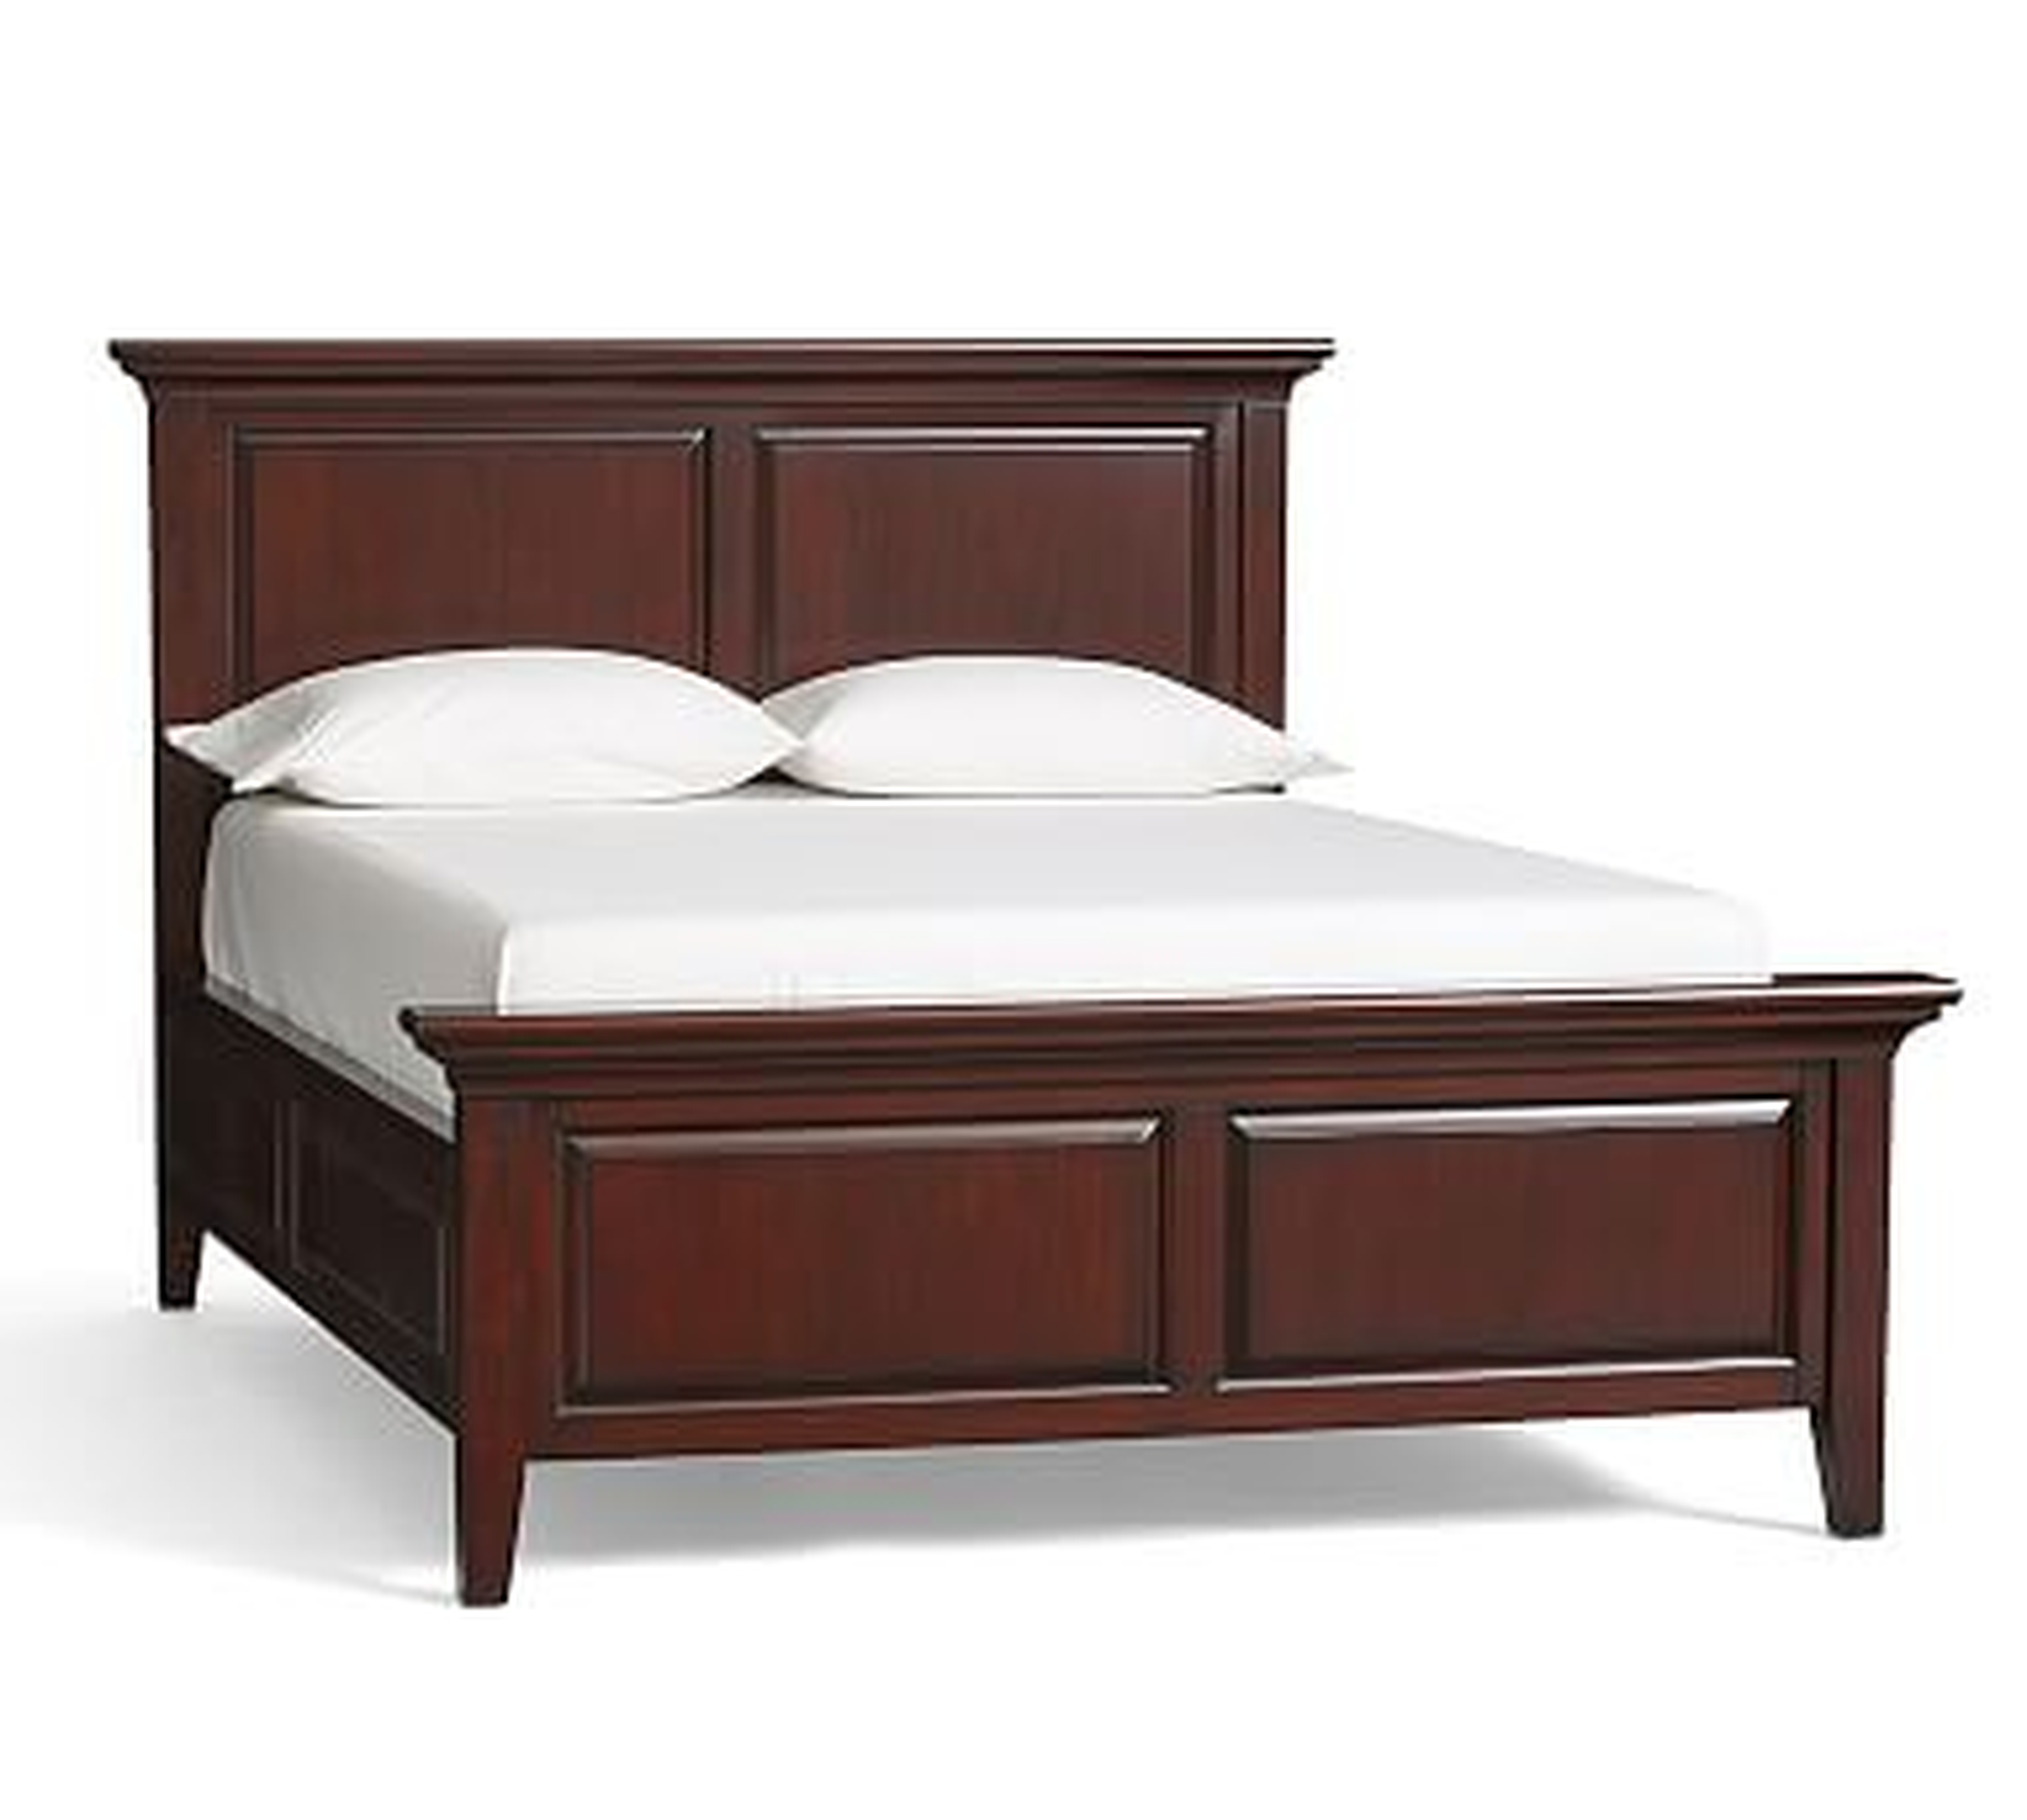 Hudson Wood Storage Bed with Drawers, Queen, Mahogany stain - Pottery Barn